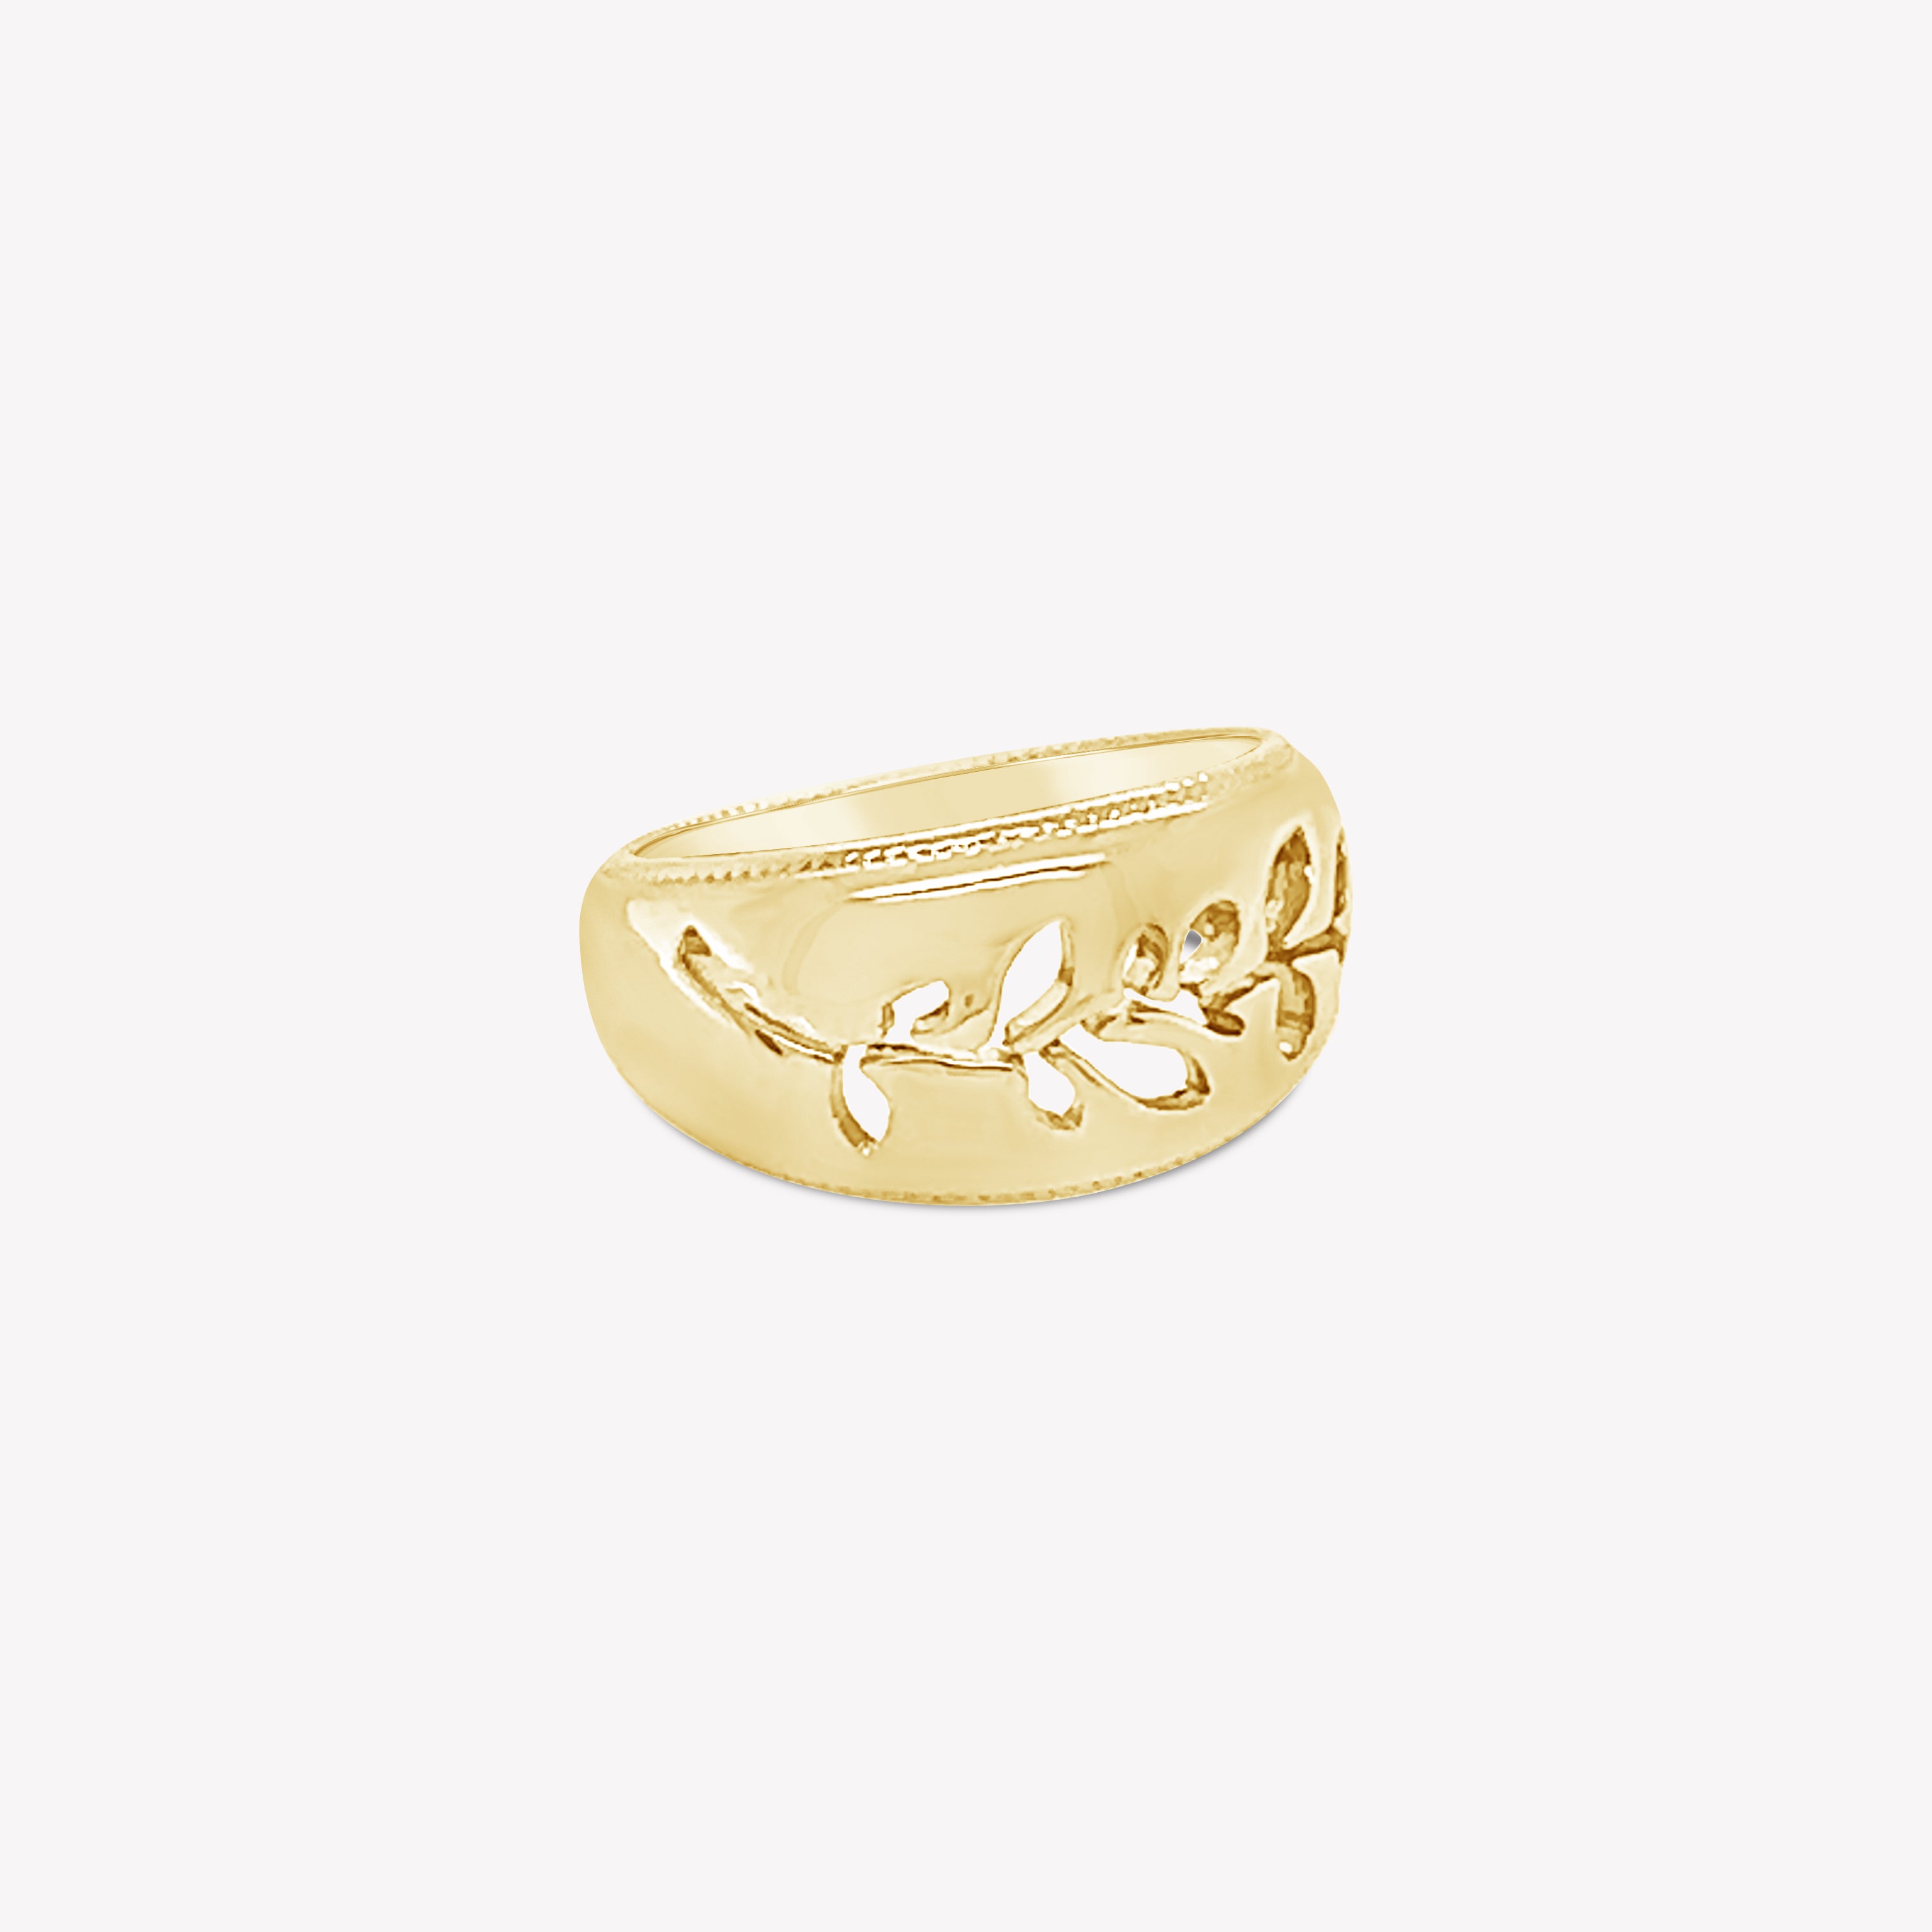 Intricately designed Olive Branch Ring in 18k gold vermeil from the Rooted Collection by Rizen Jewelry.